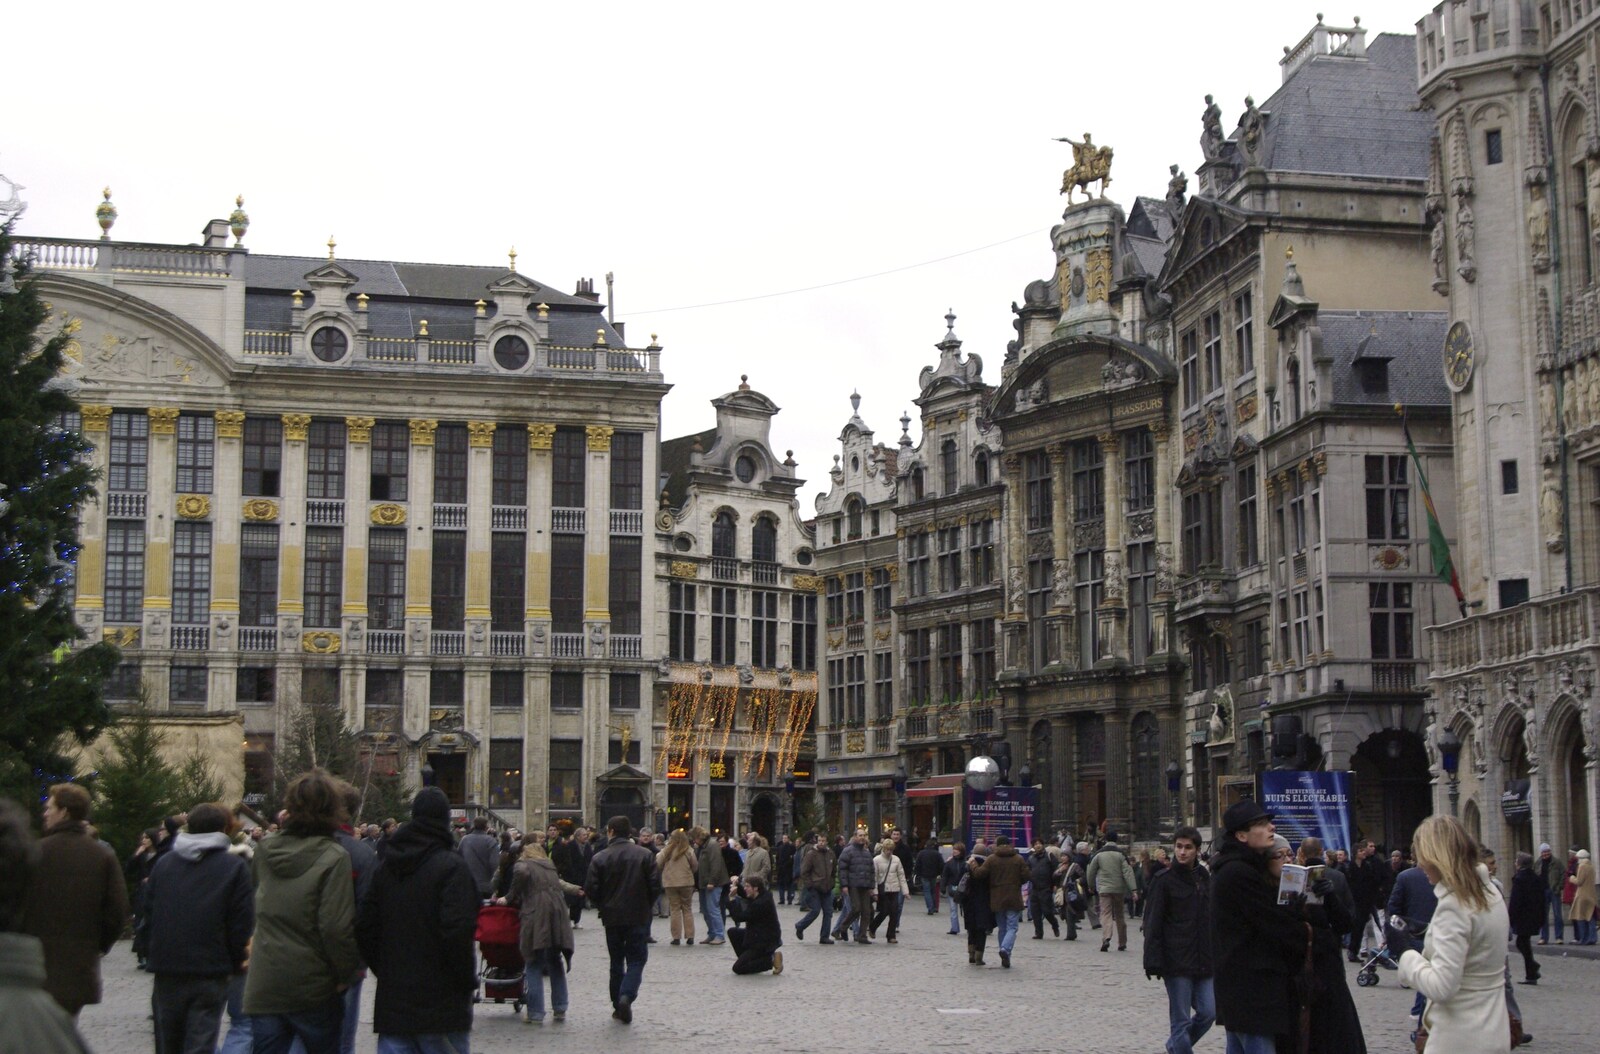 The Grand Place from The Christmas Markets of Brussels, Belgium - 1st January 2007